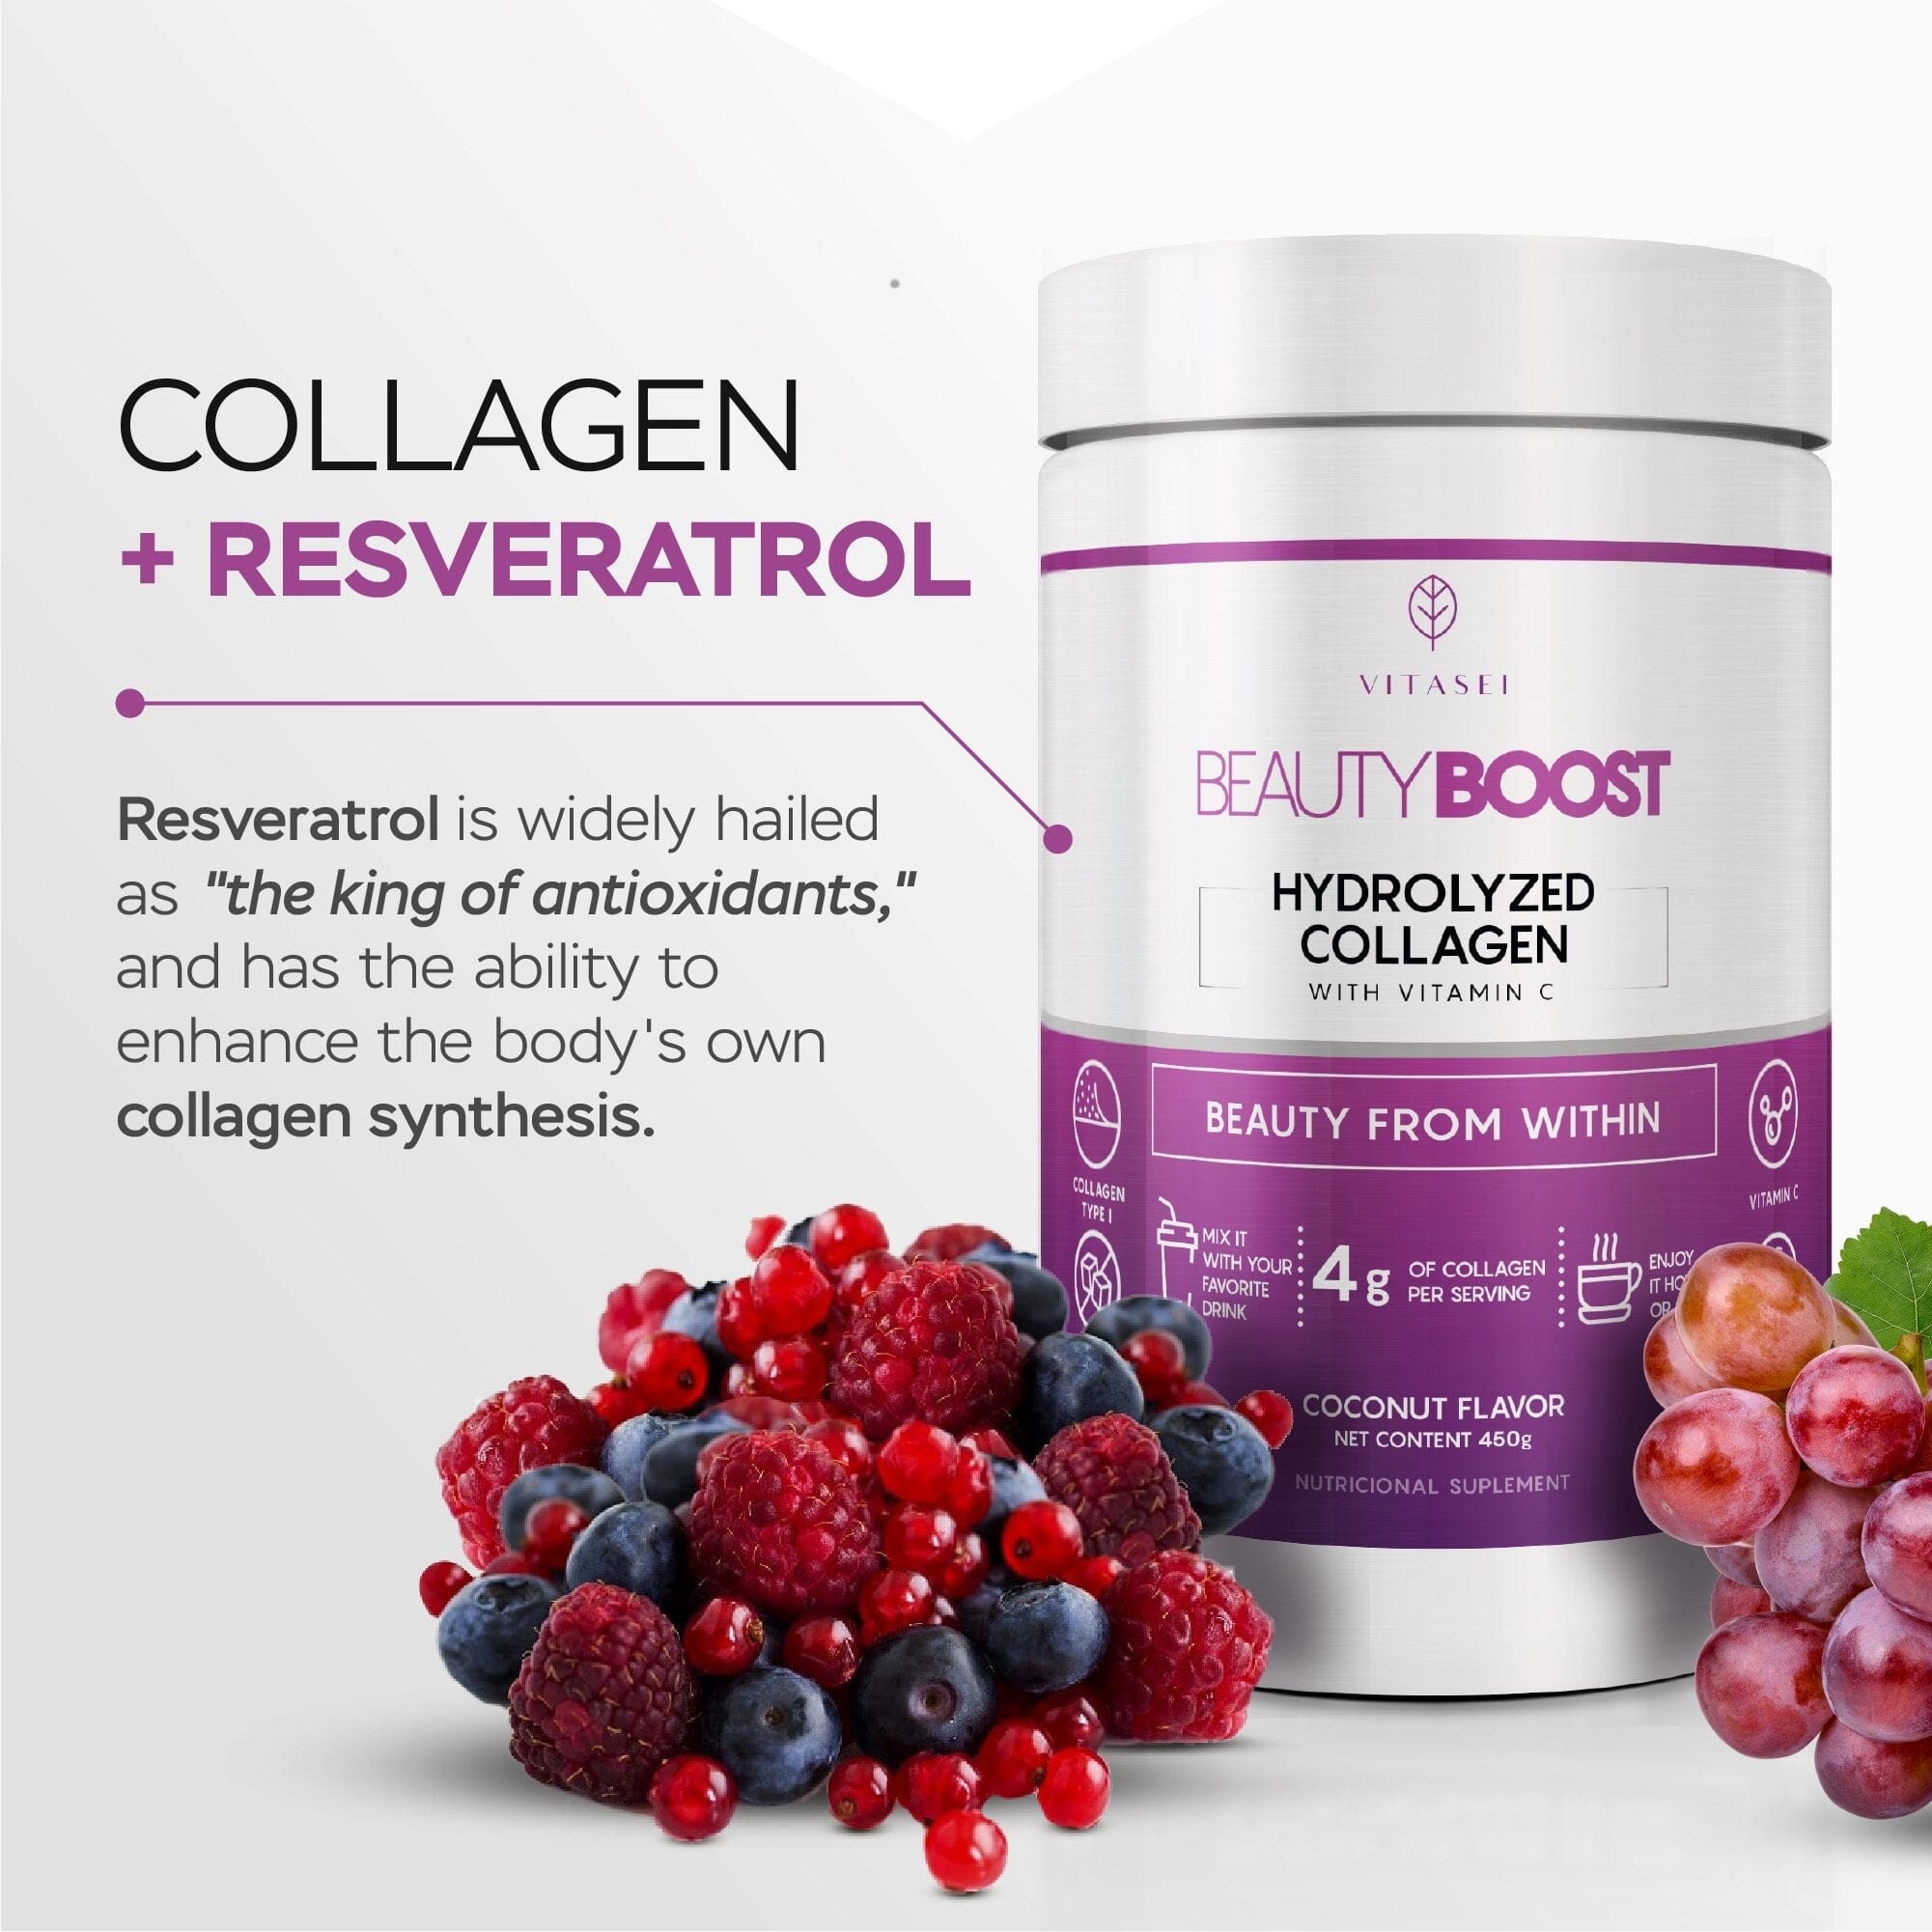 HYDROLYZED COLLAGEN + RESVERATROL COCONUT FLAVOR AND UNFLAVORED KIT